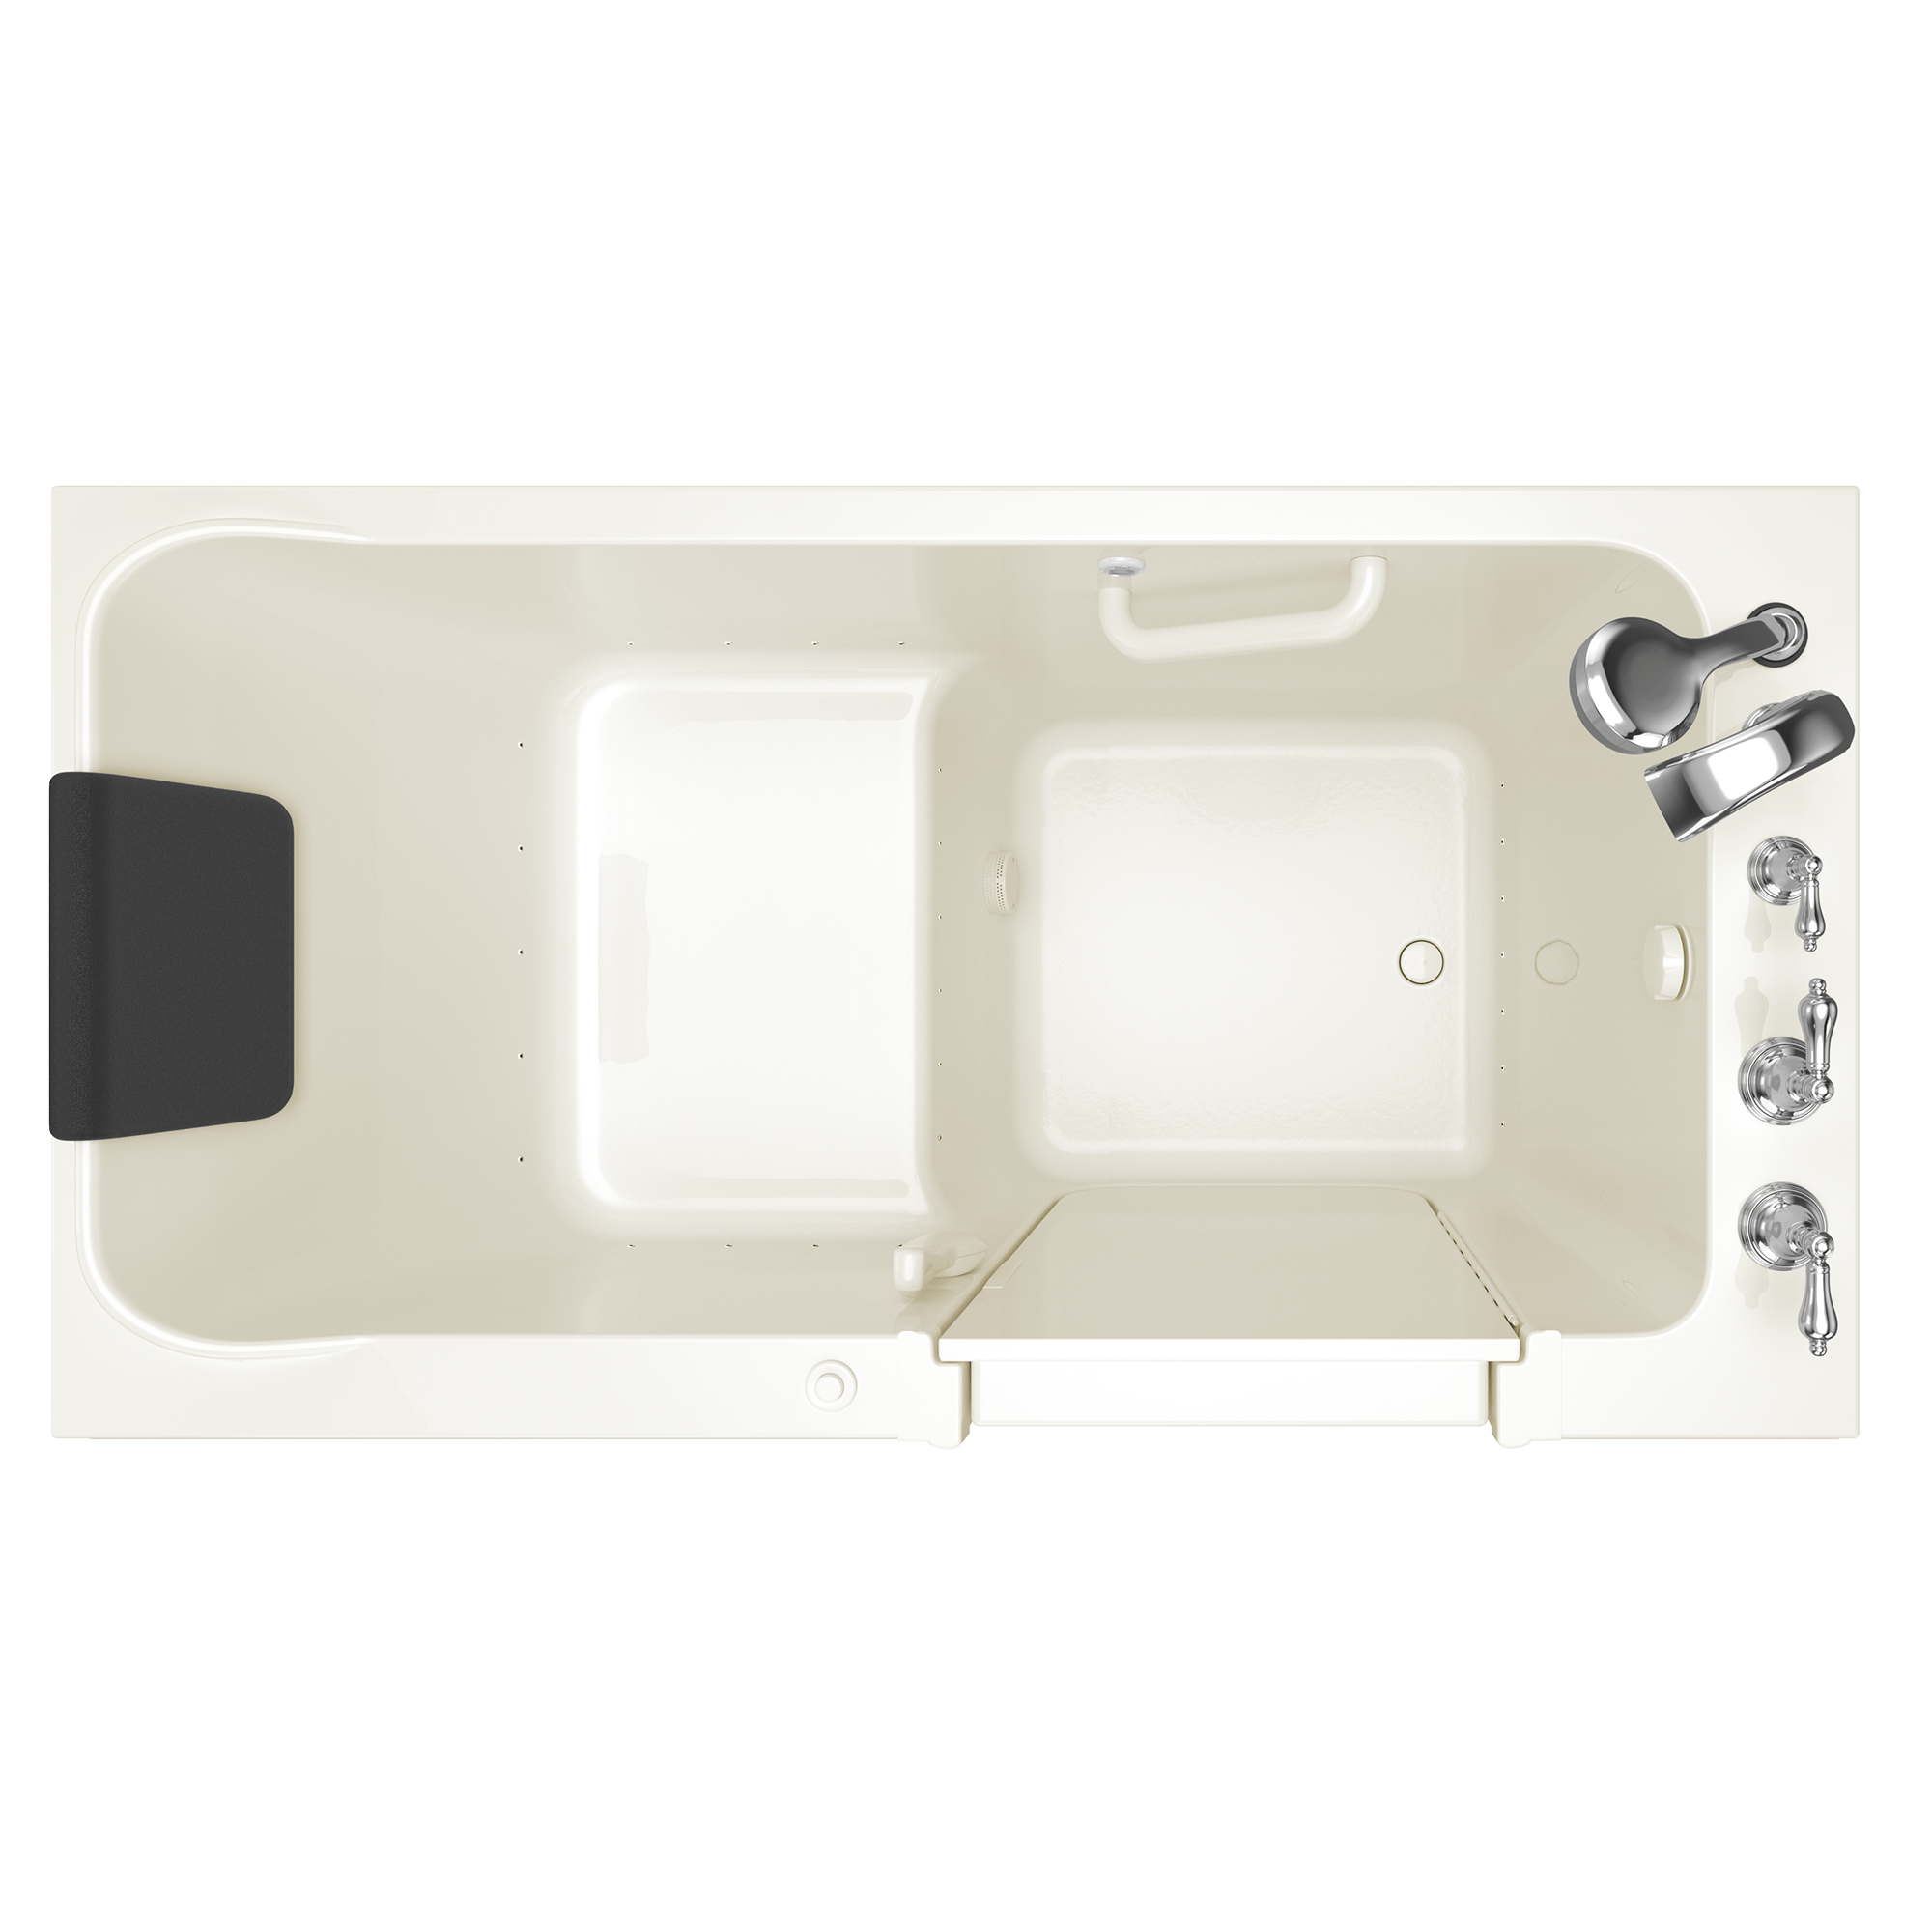 Acrylic Luxury Series 32 x 60  Inch Walk in Tub With Air Spa System   Right Hand Drain With Faucet WIB LINEN